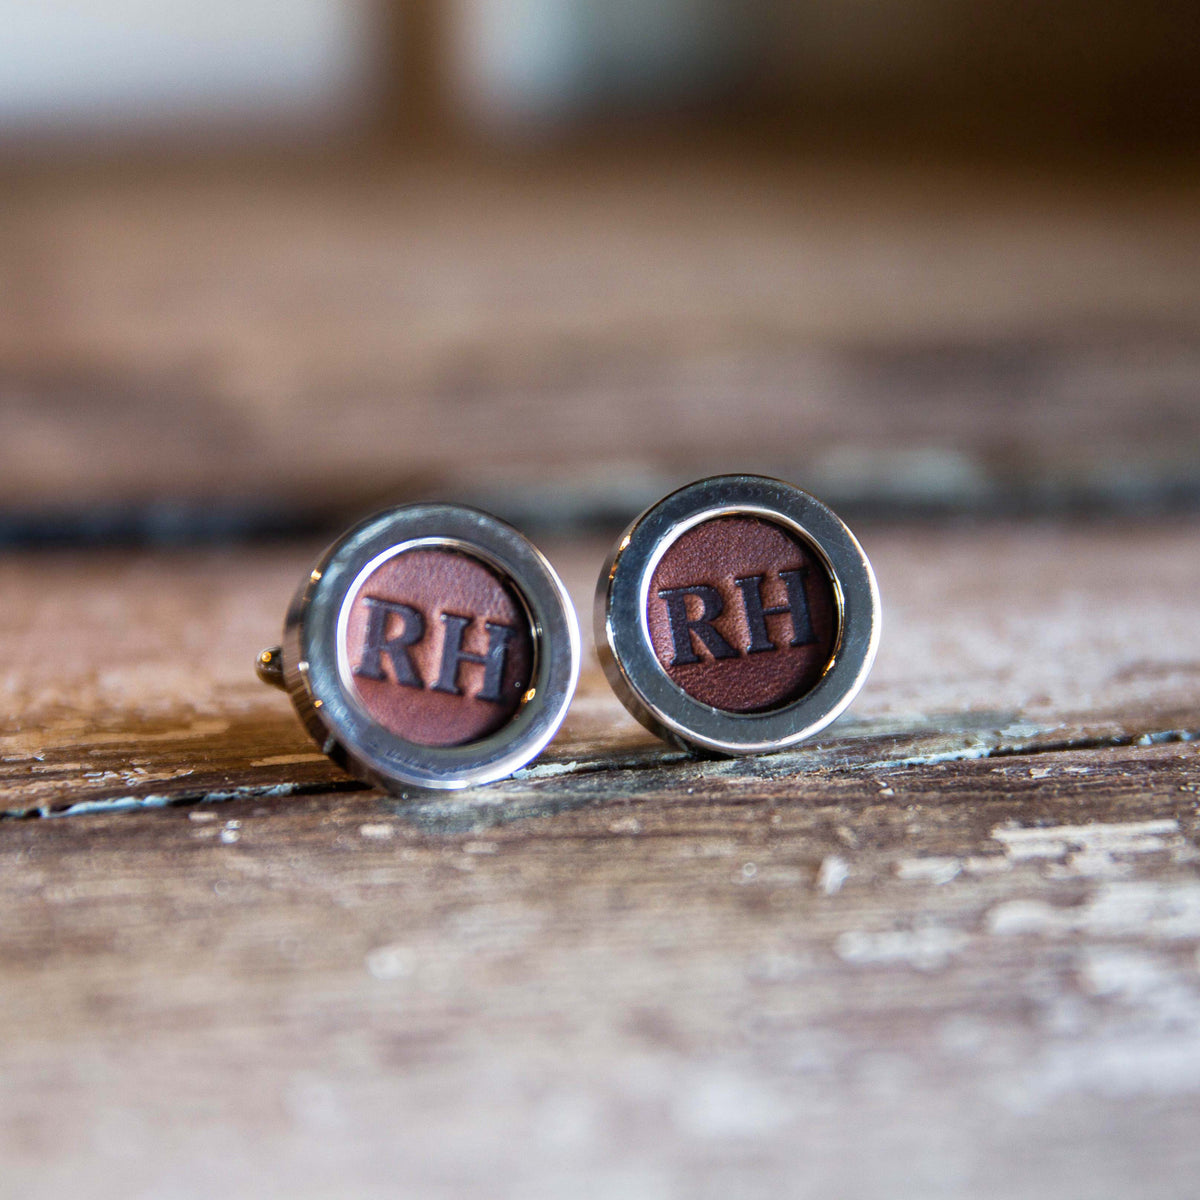 Set of fine leather cufflinks with personalized initials